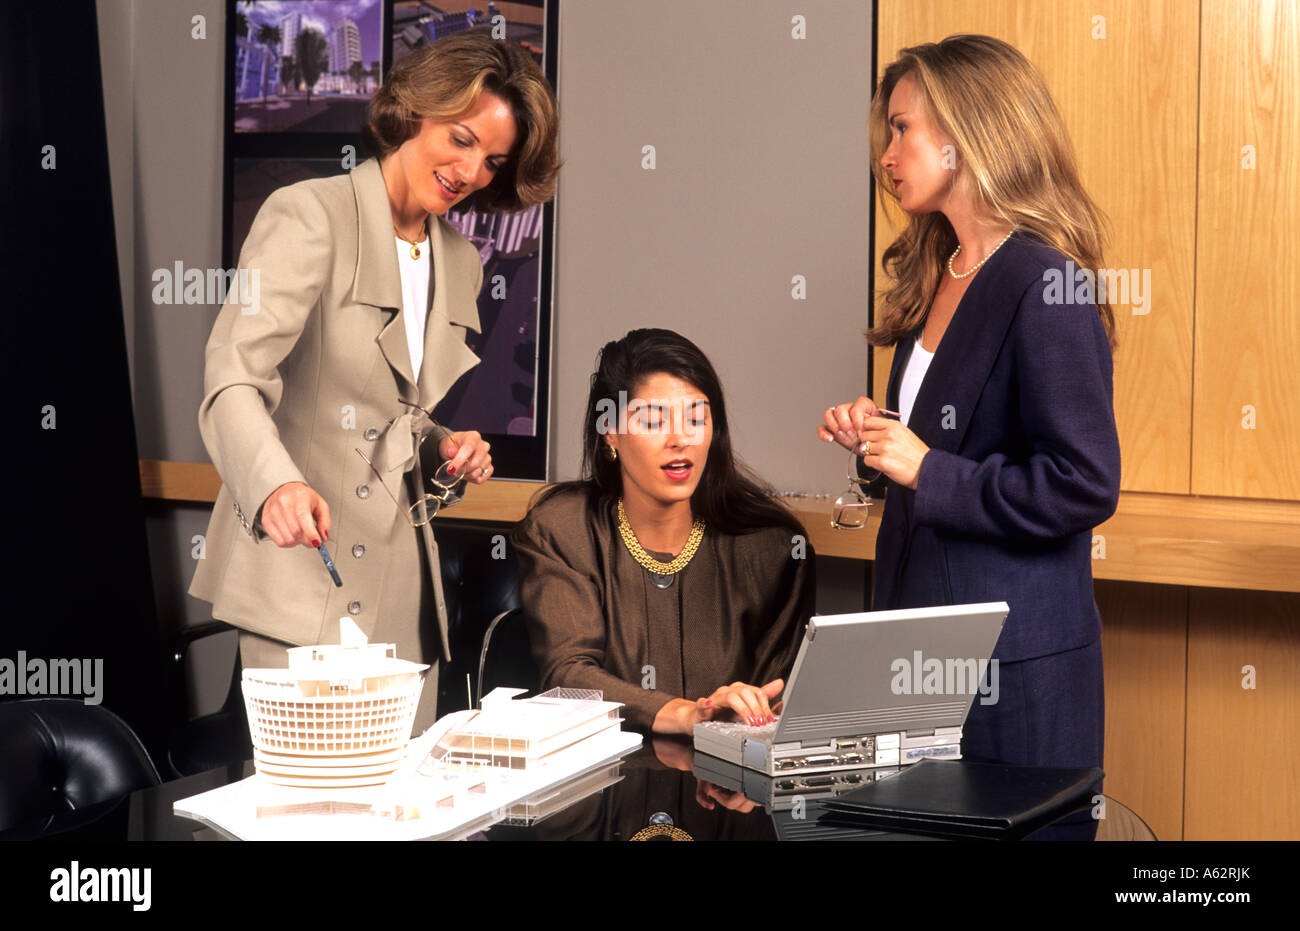 Successful women business with conference and communication at computer in boardroom discussing architecture project Stock Photo